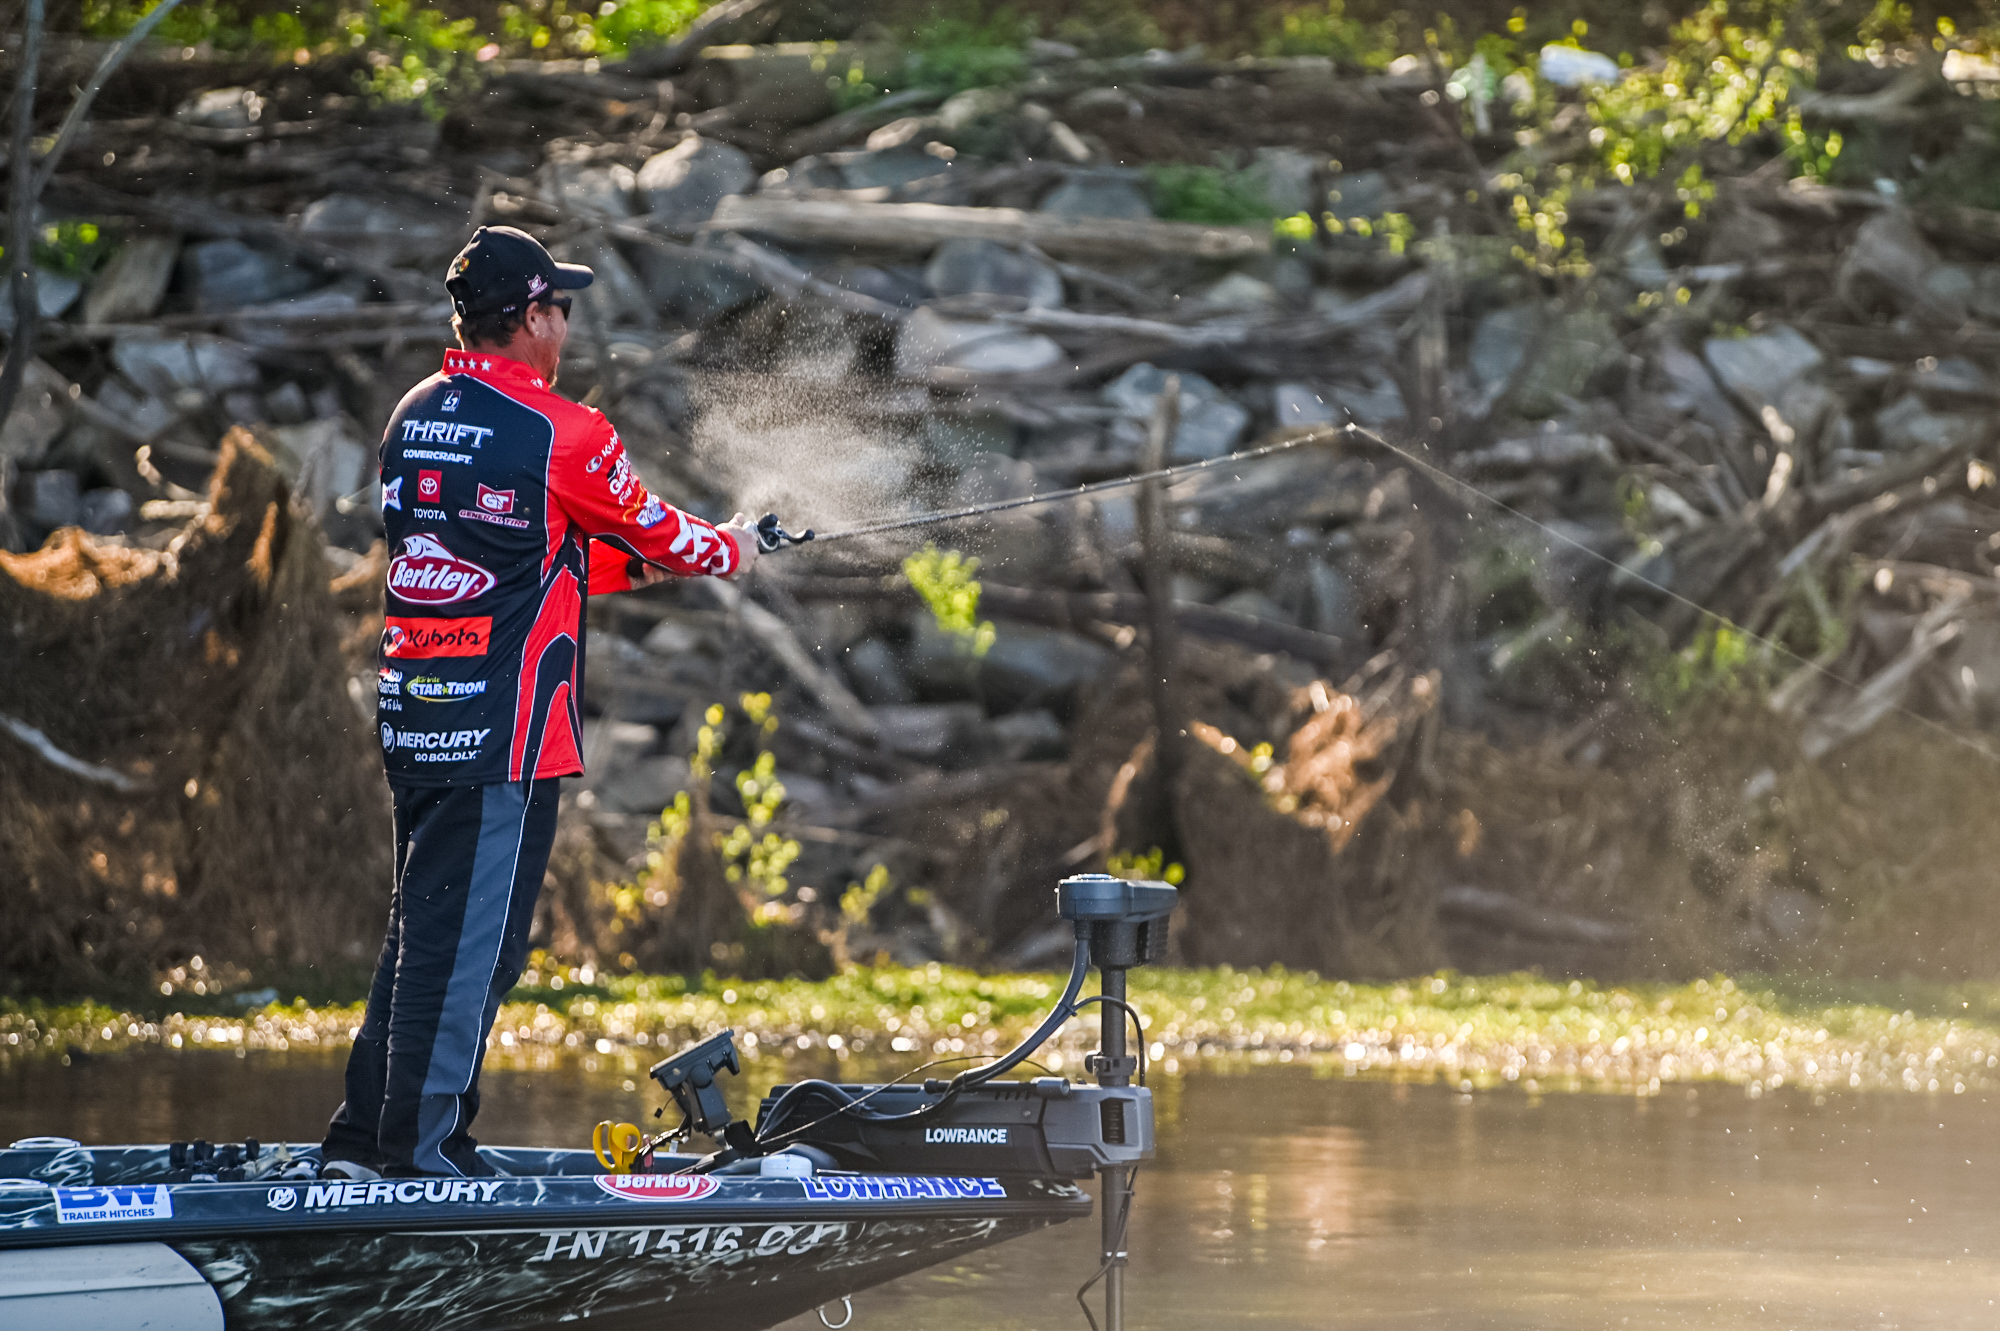 Thrift Tops Qualifying Round Group B at General Tire Heavy Hitters  Presented by Bass Pro Shops - Major League Fishing